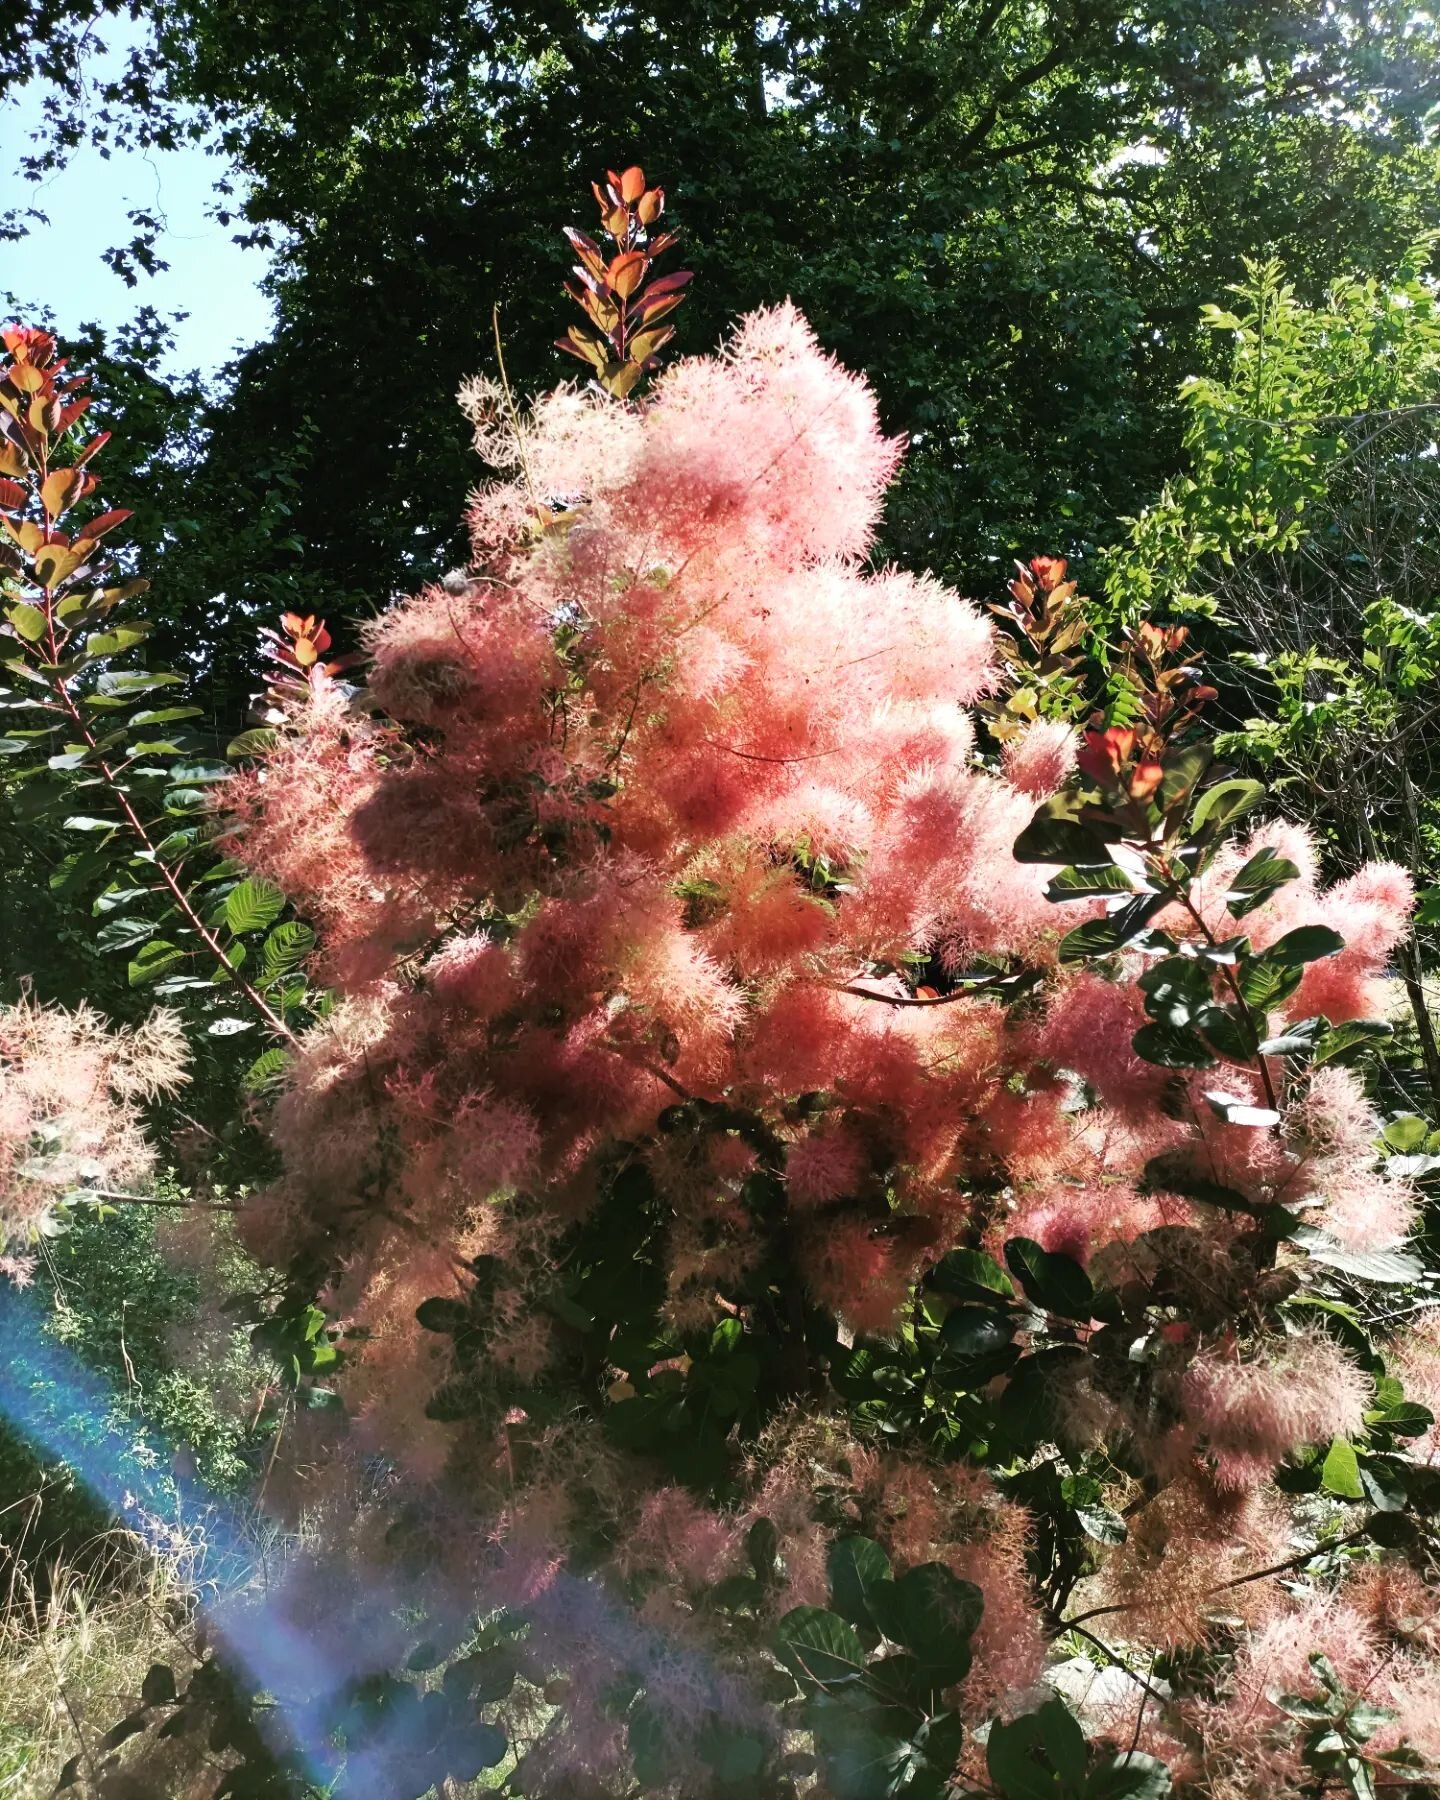 This fluffy plant gave me some joy today 🩷 It's a smoketree, thanks Google lens! For some reason it is quite dreamy looking 💭

Now I'm wondering why I didn't see if it was soft 😂

#naturetherapy #surbiton #kingstonuponthames #joyspotting